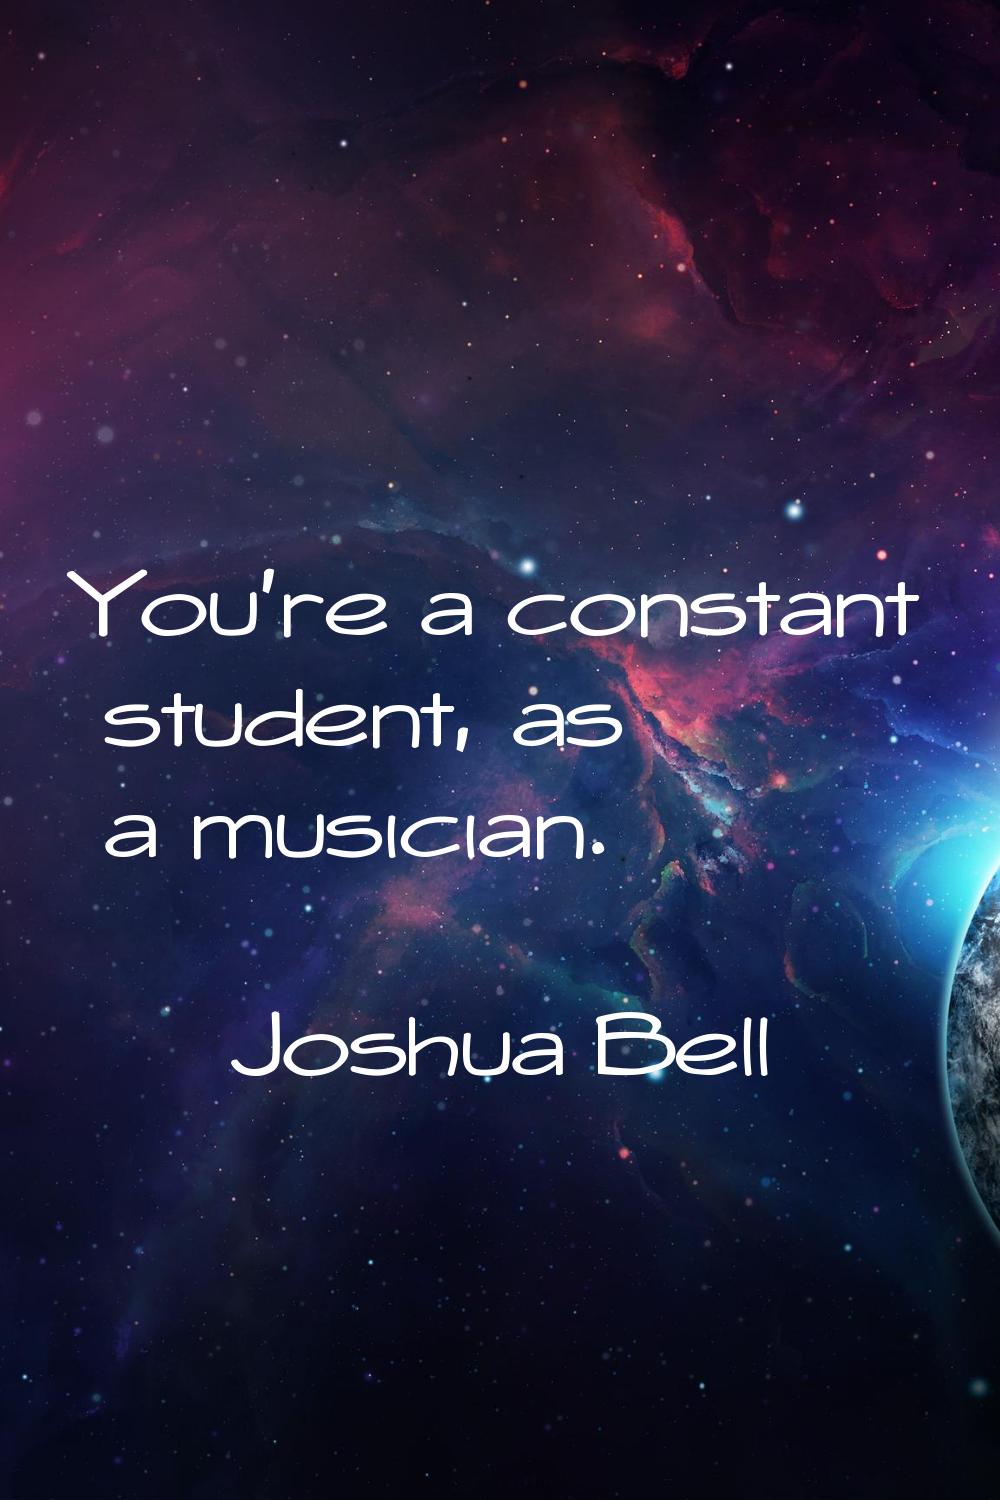 You're a constant student, as a musician.